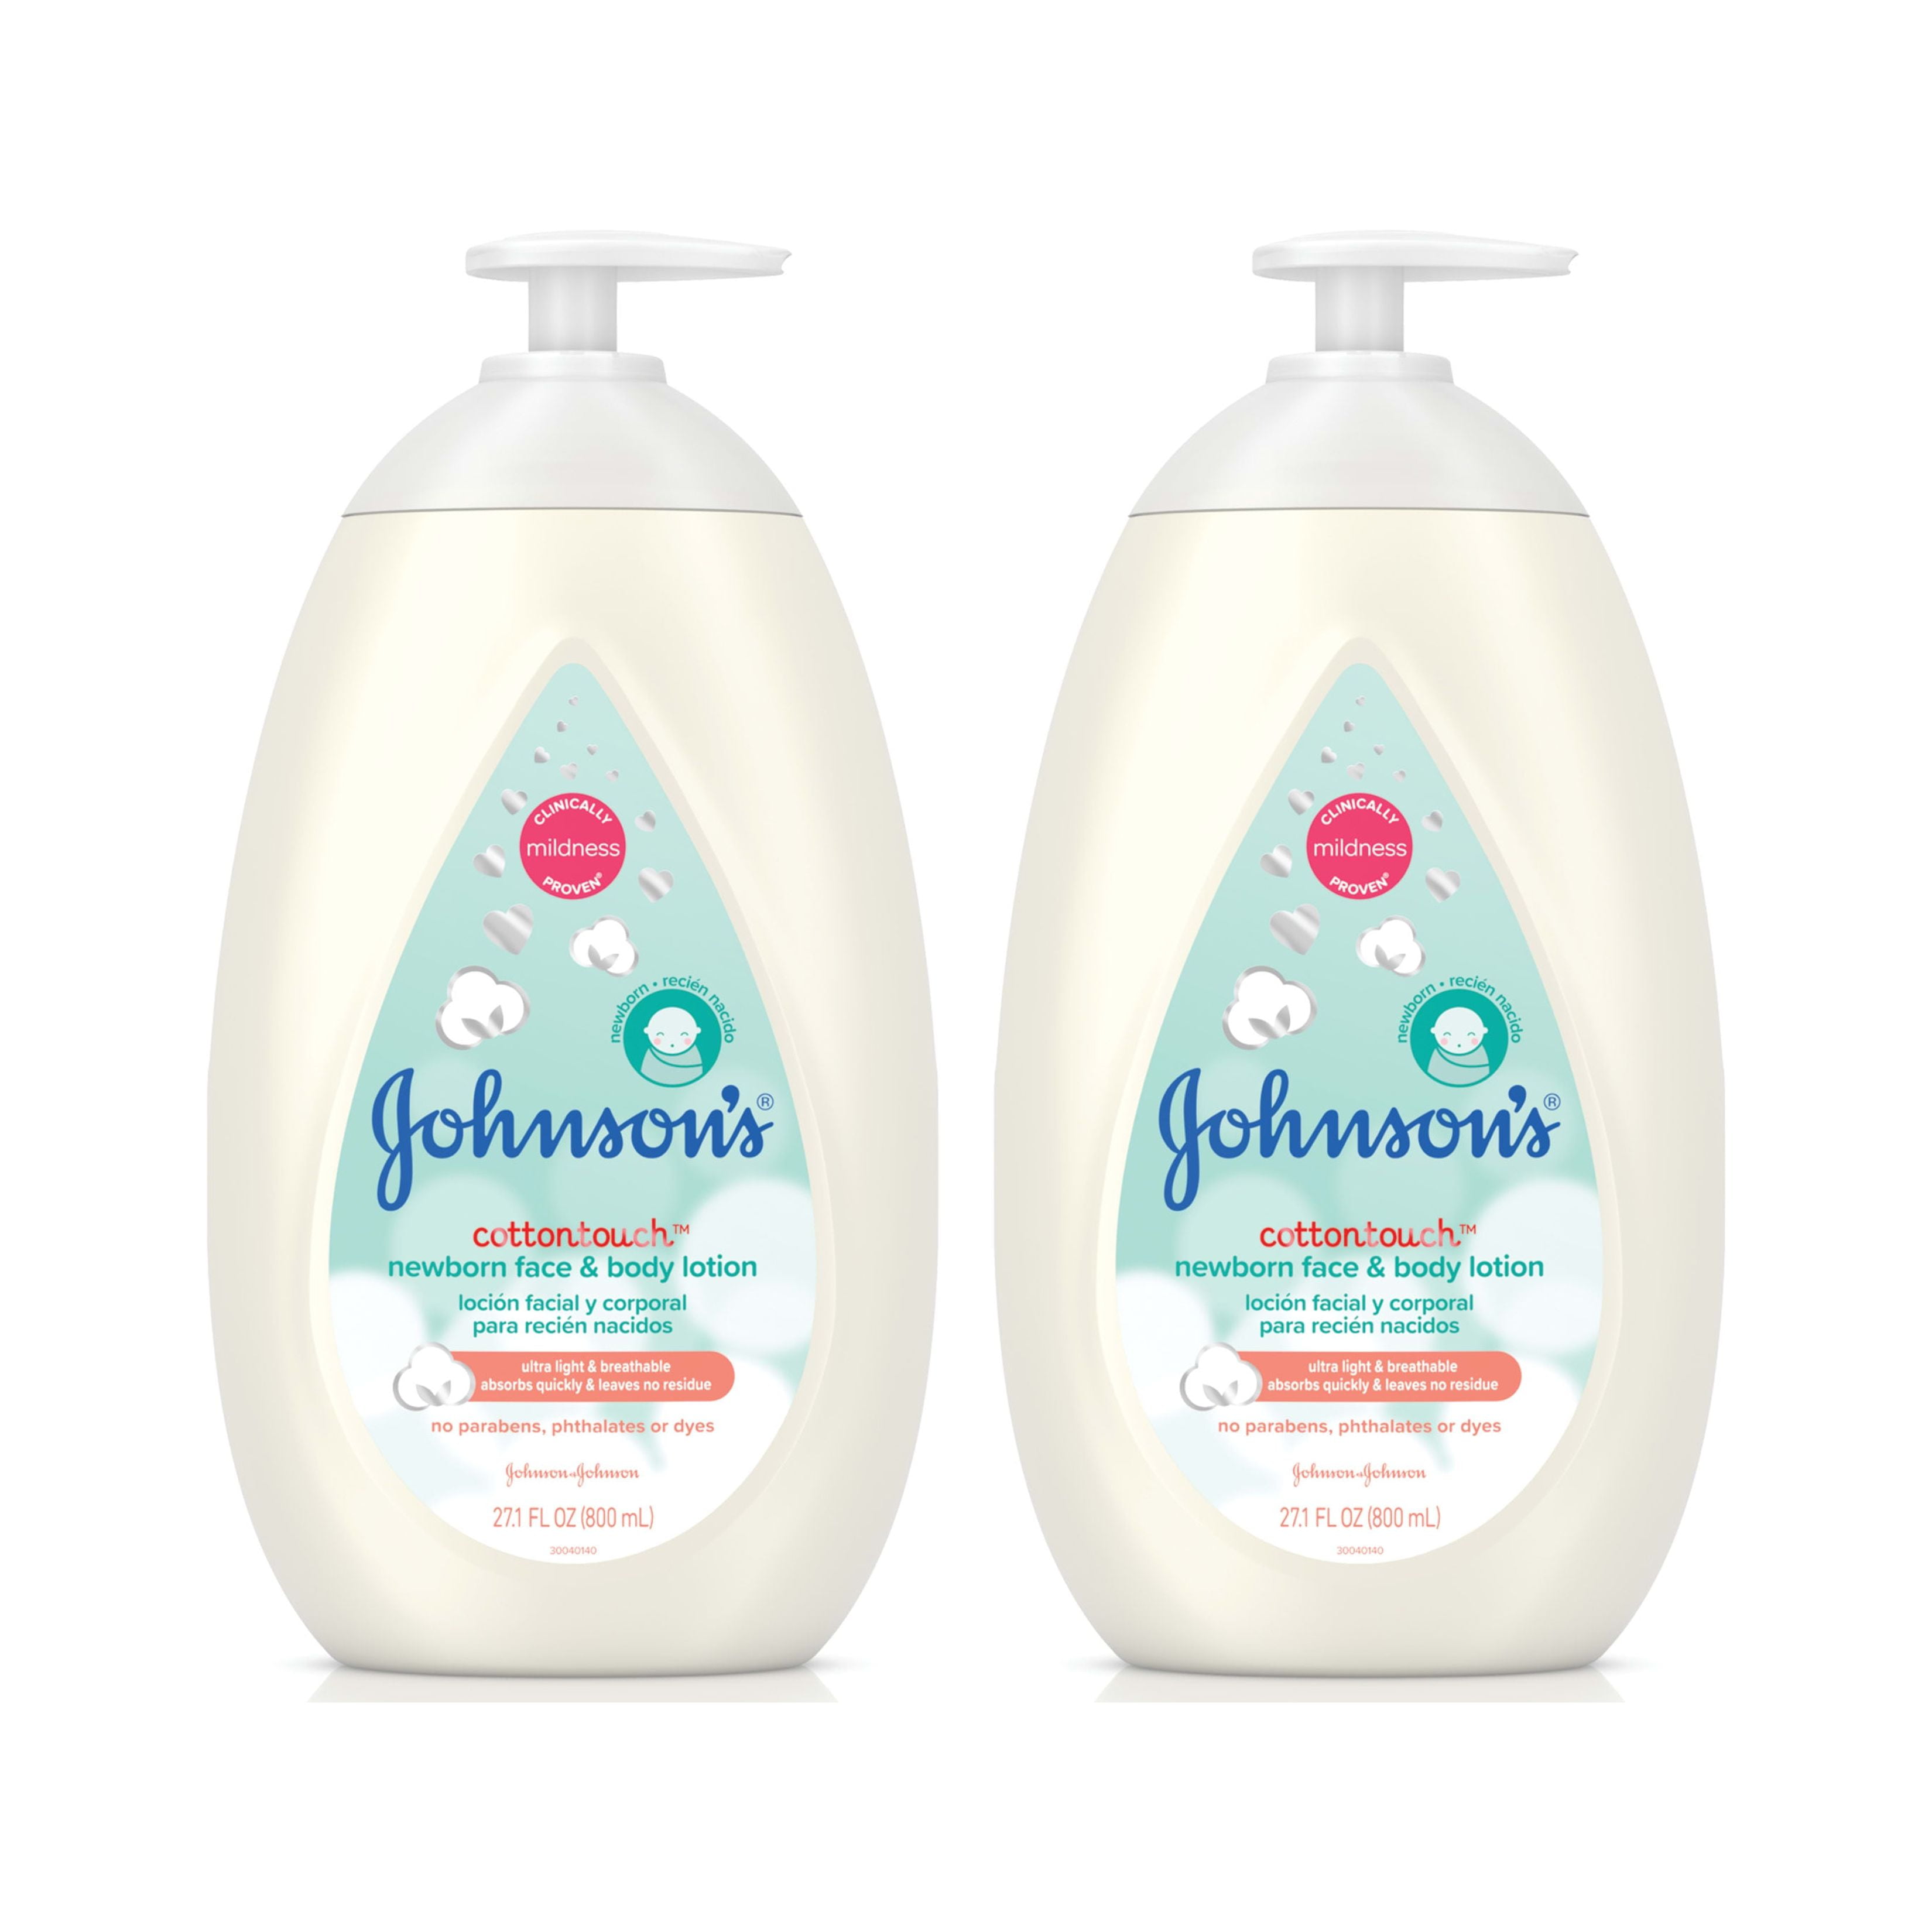 Johnson's CottonTouch Newborn Baby Face and Body Lotion, 27.1 fl. oz